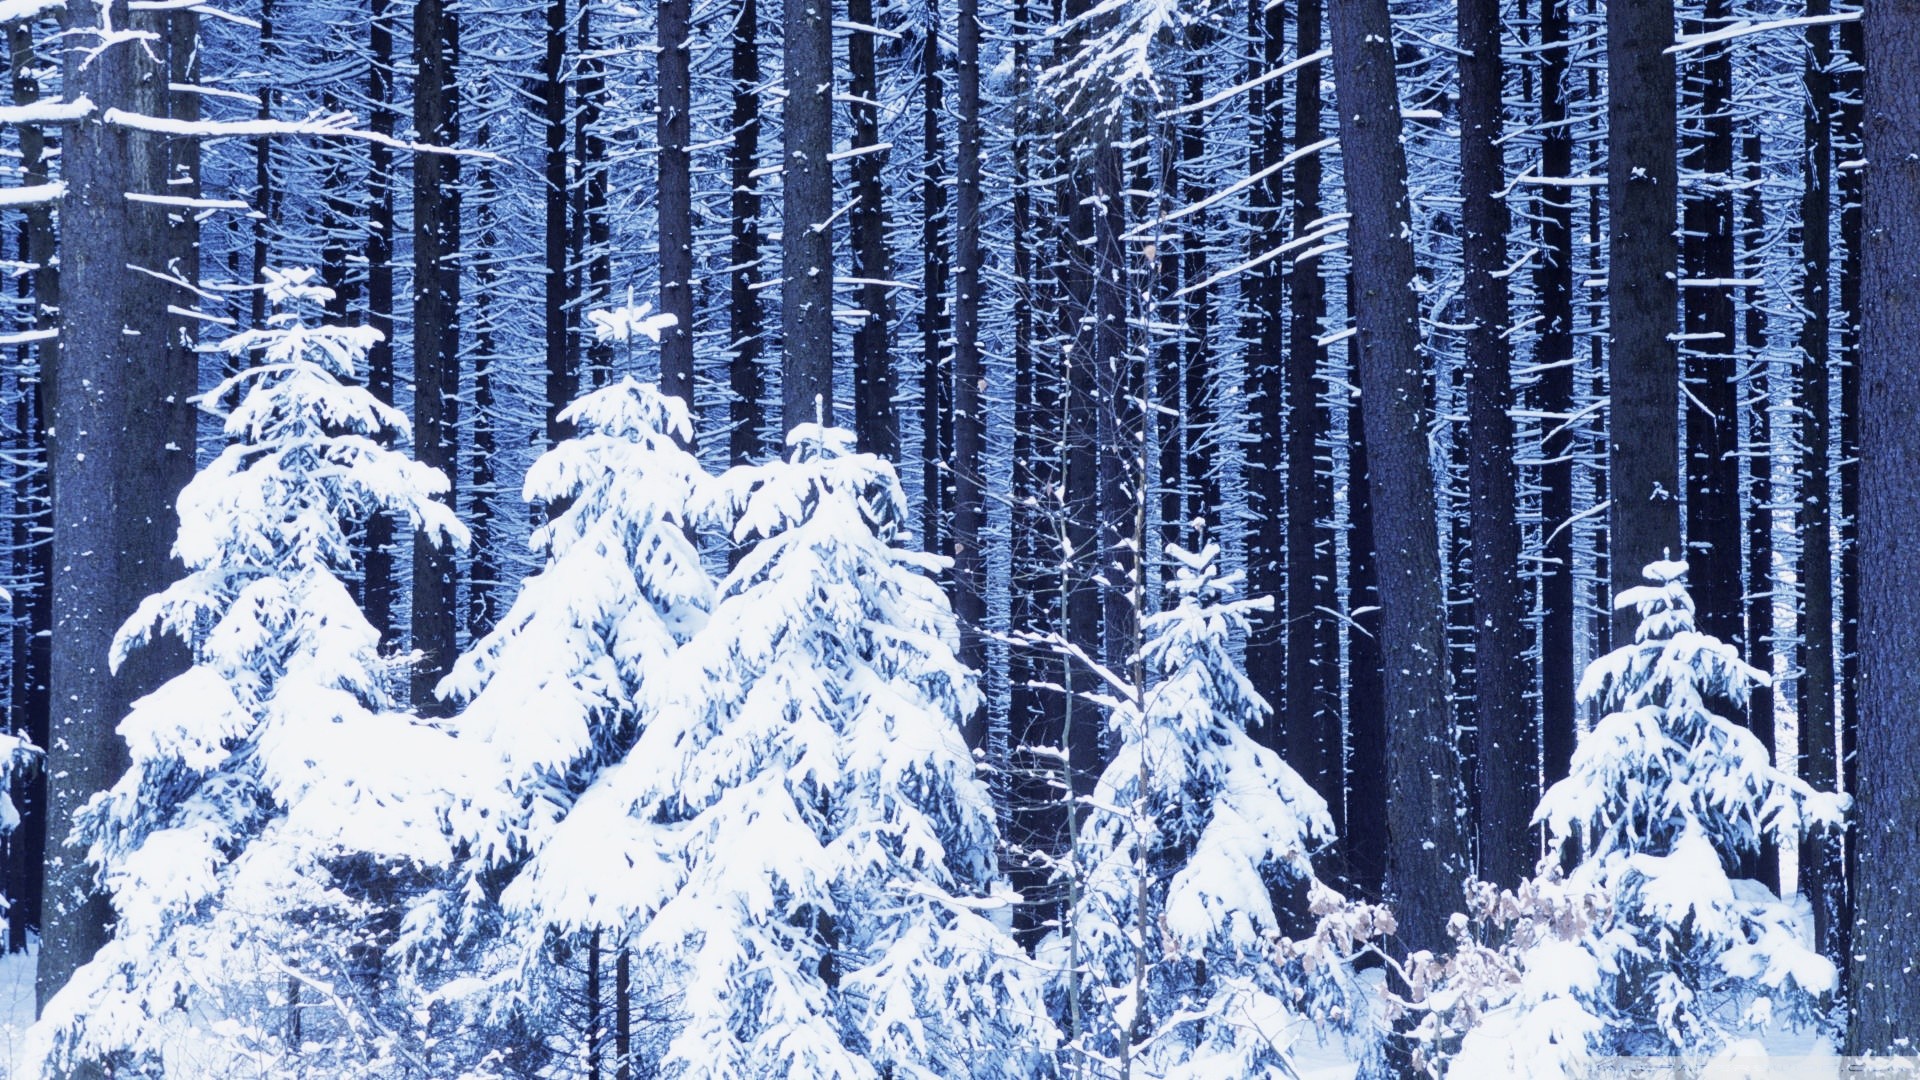 640x1136 Winter tree snow forest nature Iphone 5 wallpaper